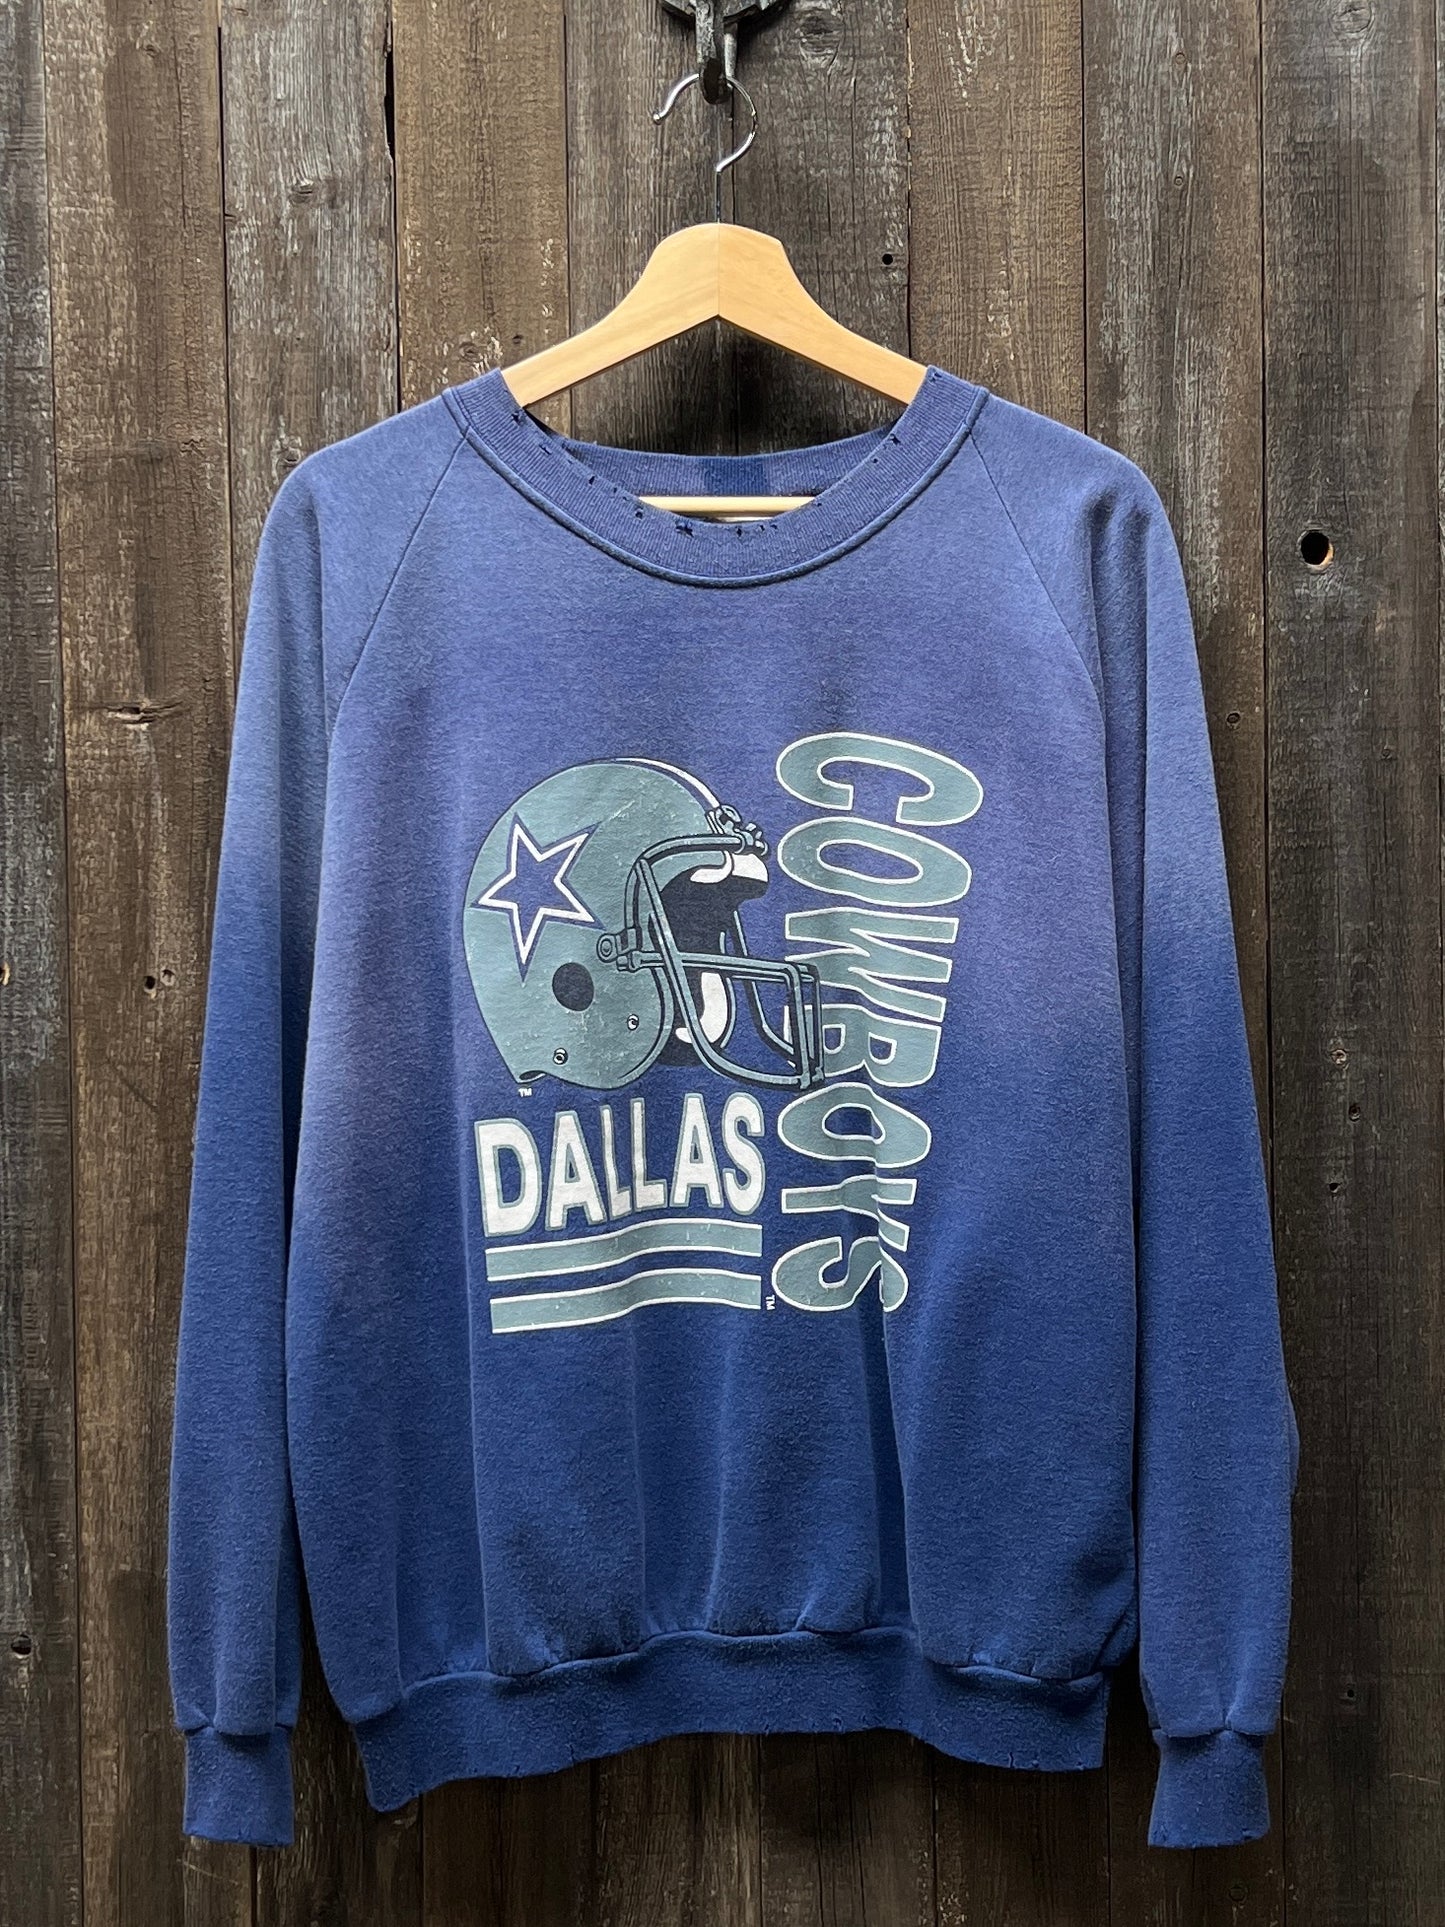 Vintage Starter Nfl Dallas Cowboys Hoodie Spellout Embroidery